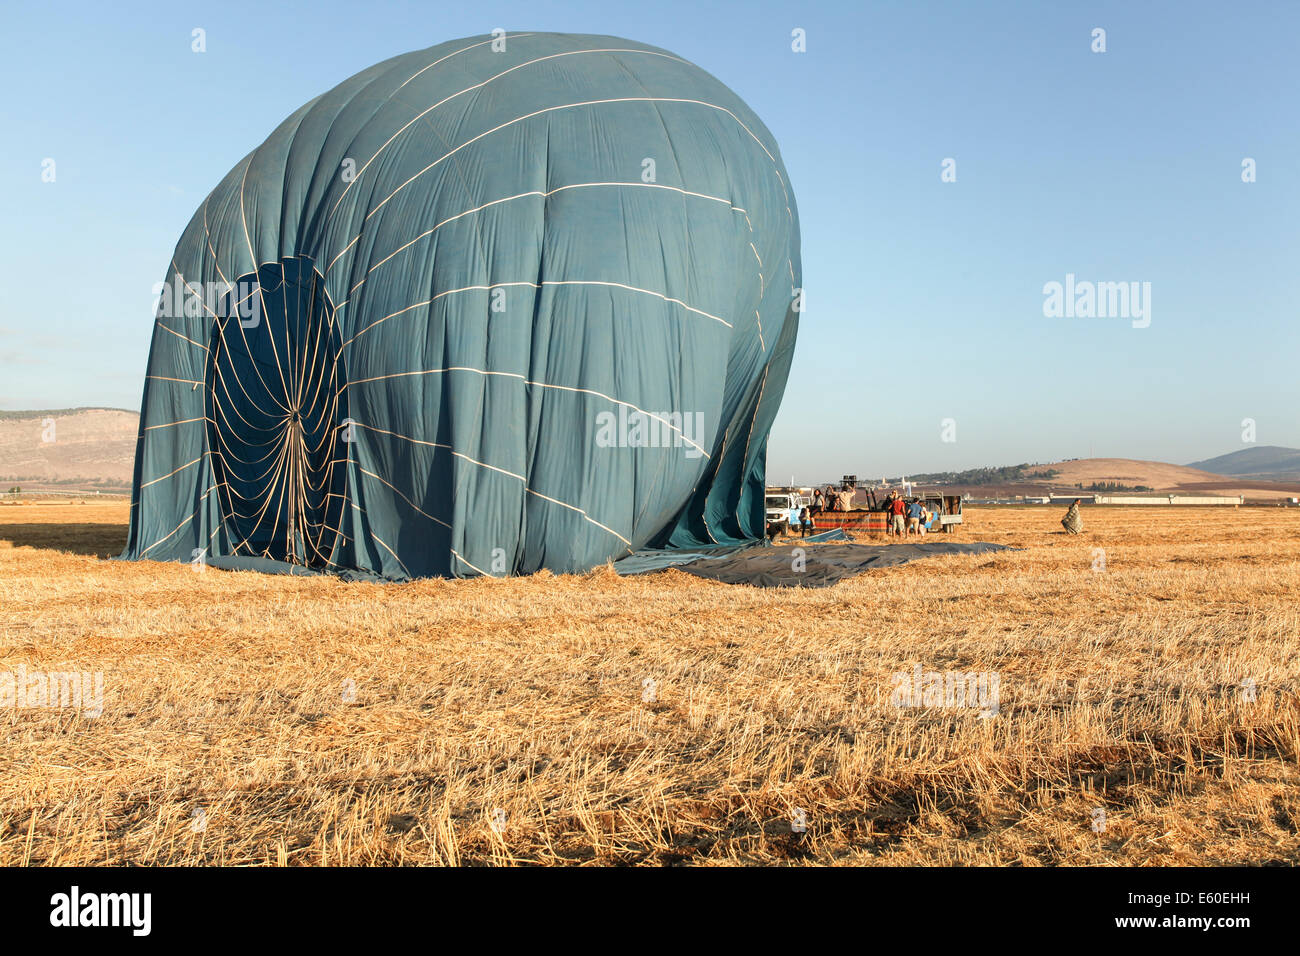 Hot air balloon being deflated. Photographed in the Jezreel Valley, Israel Mount Gilboa in the background Stock Photo